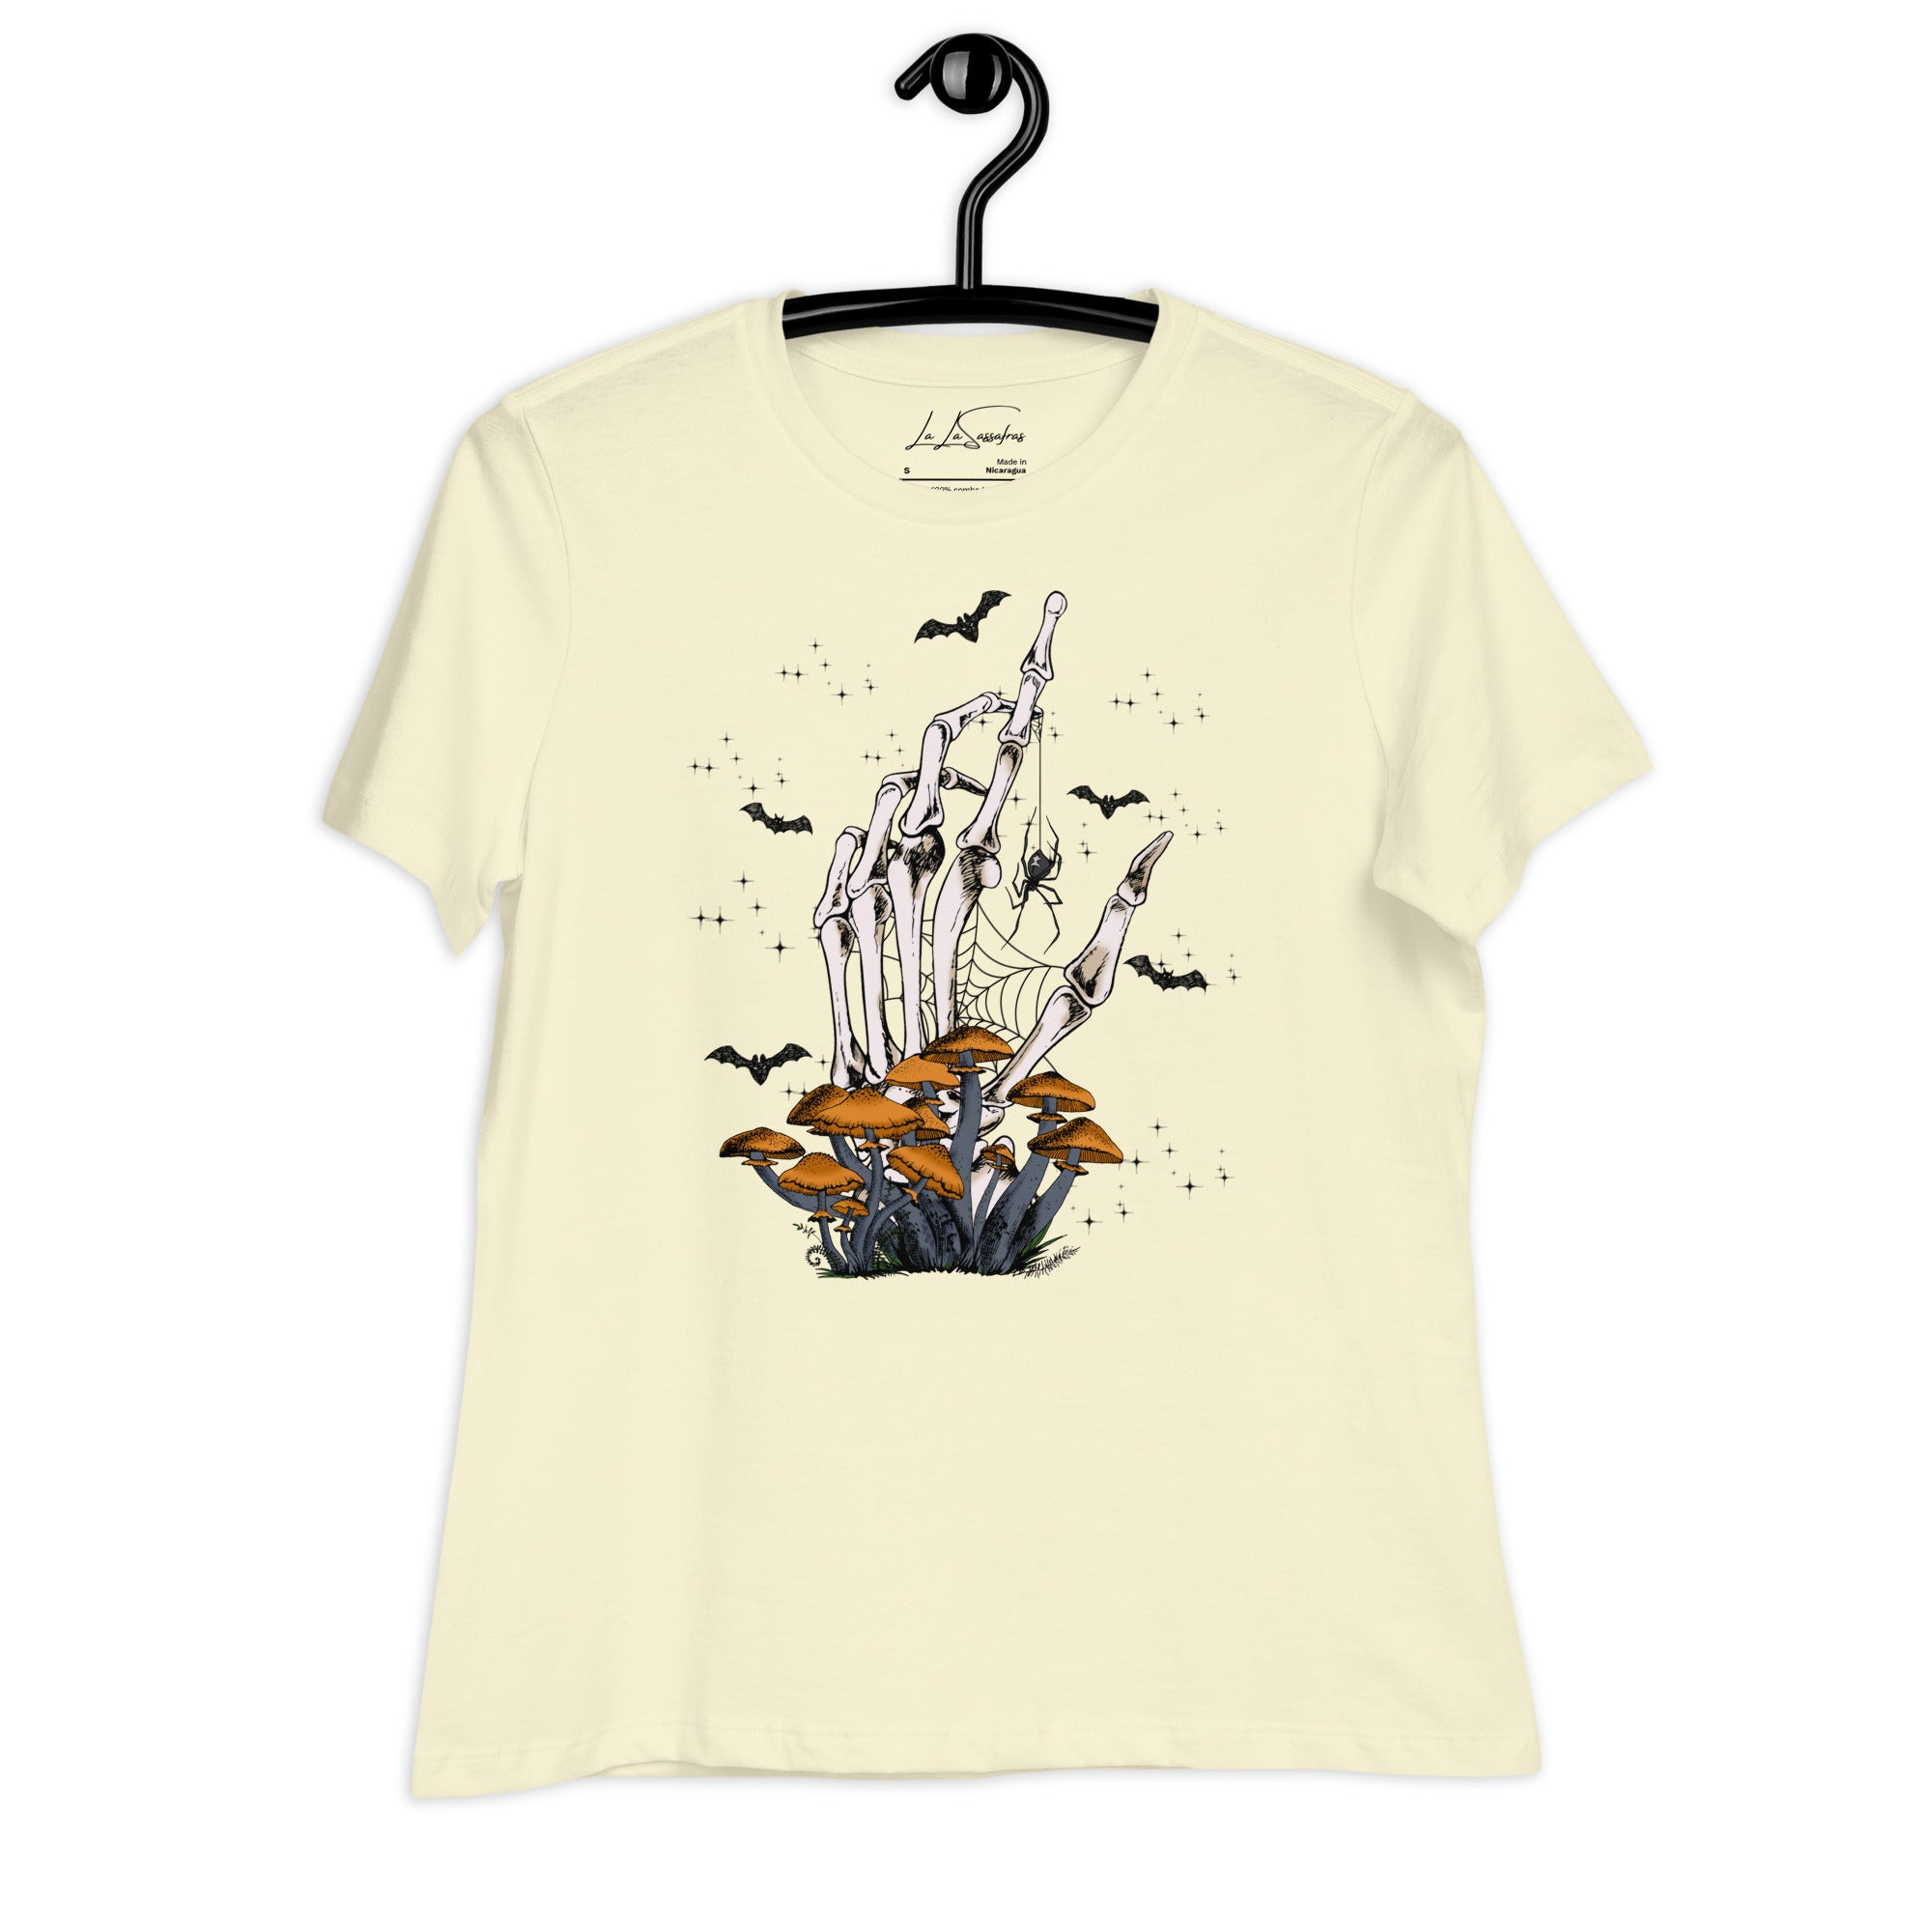 I'm A Fungi - Women's Relaxed T-Shirt